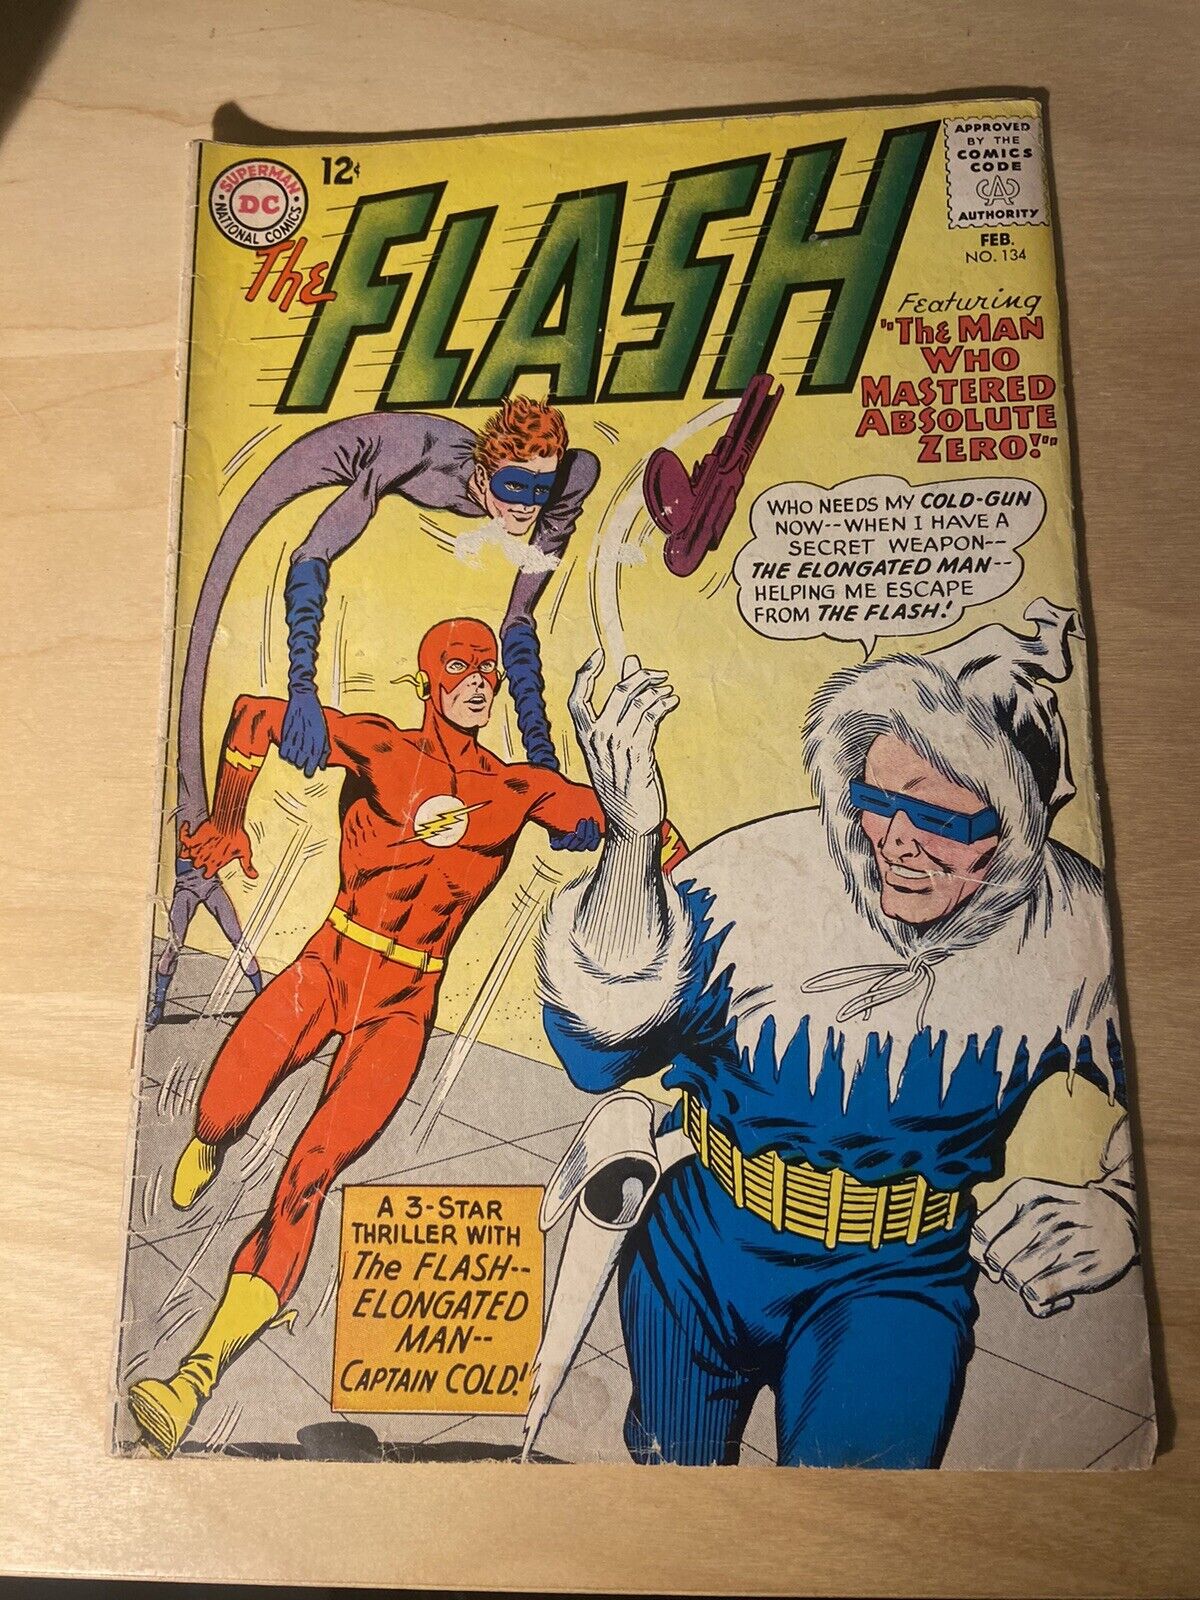 The Flash No. 134 DC 1963 Silver Age Issue Captain Cold Cover